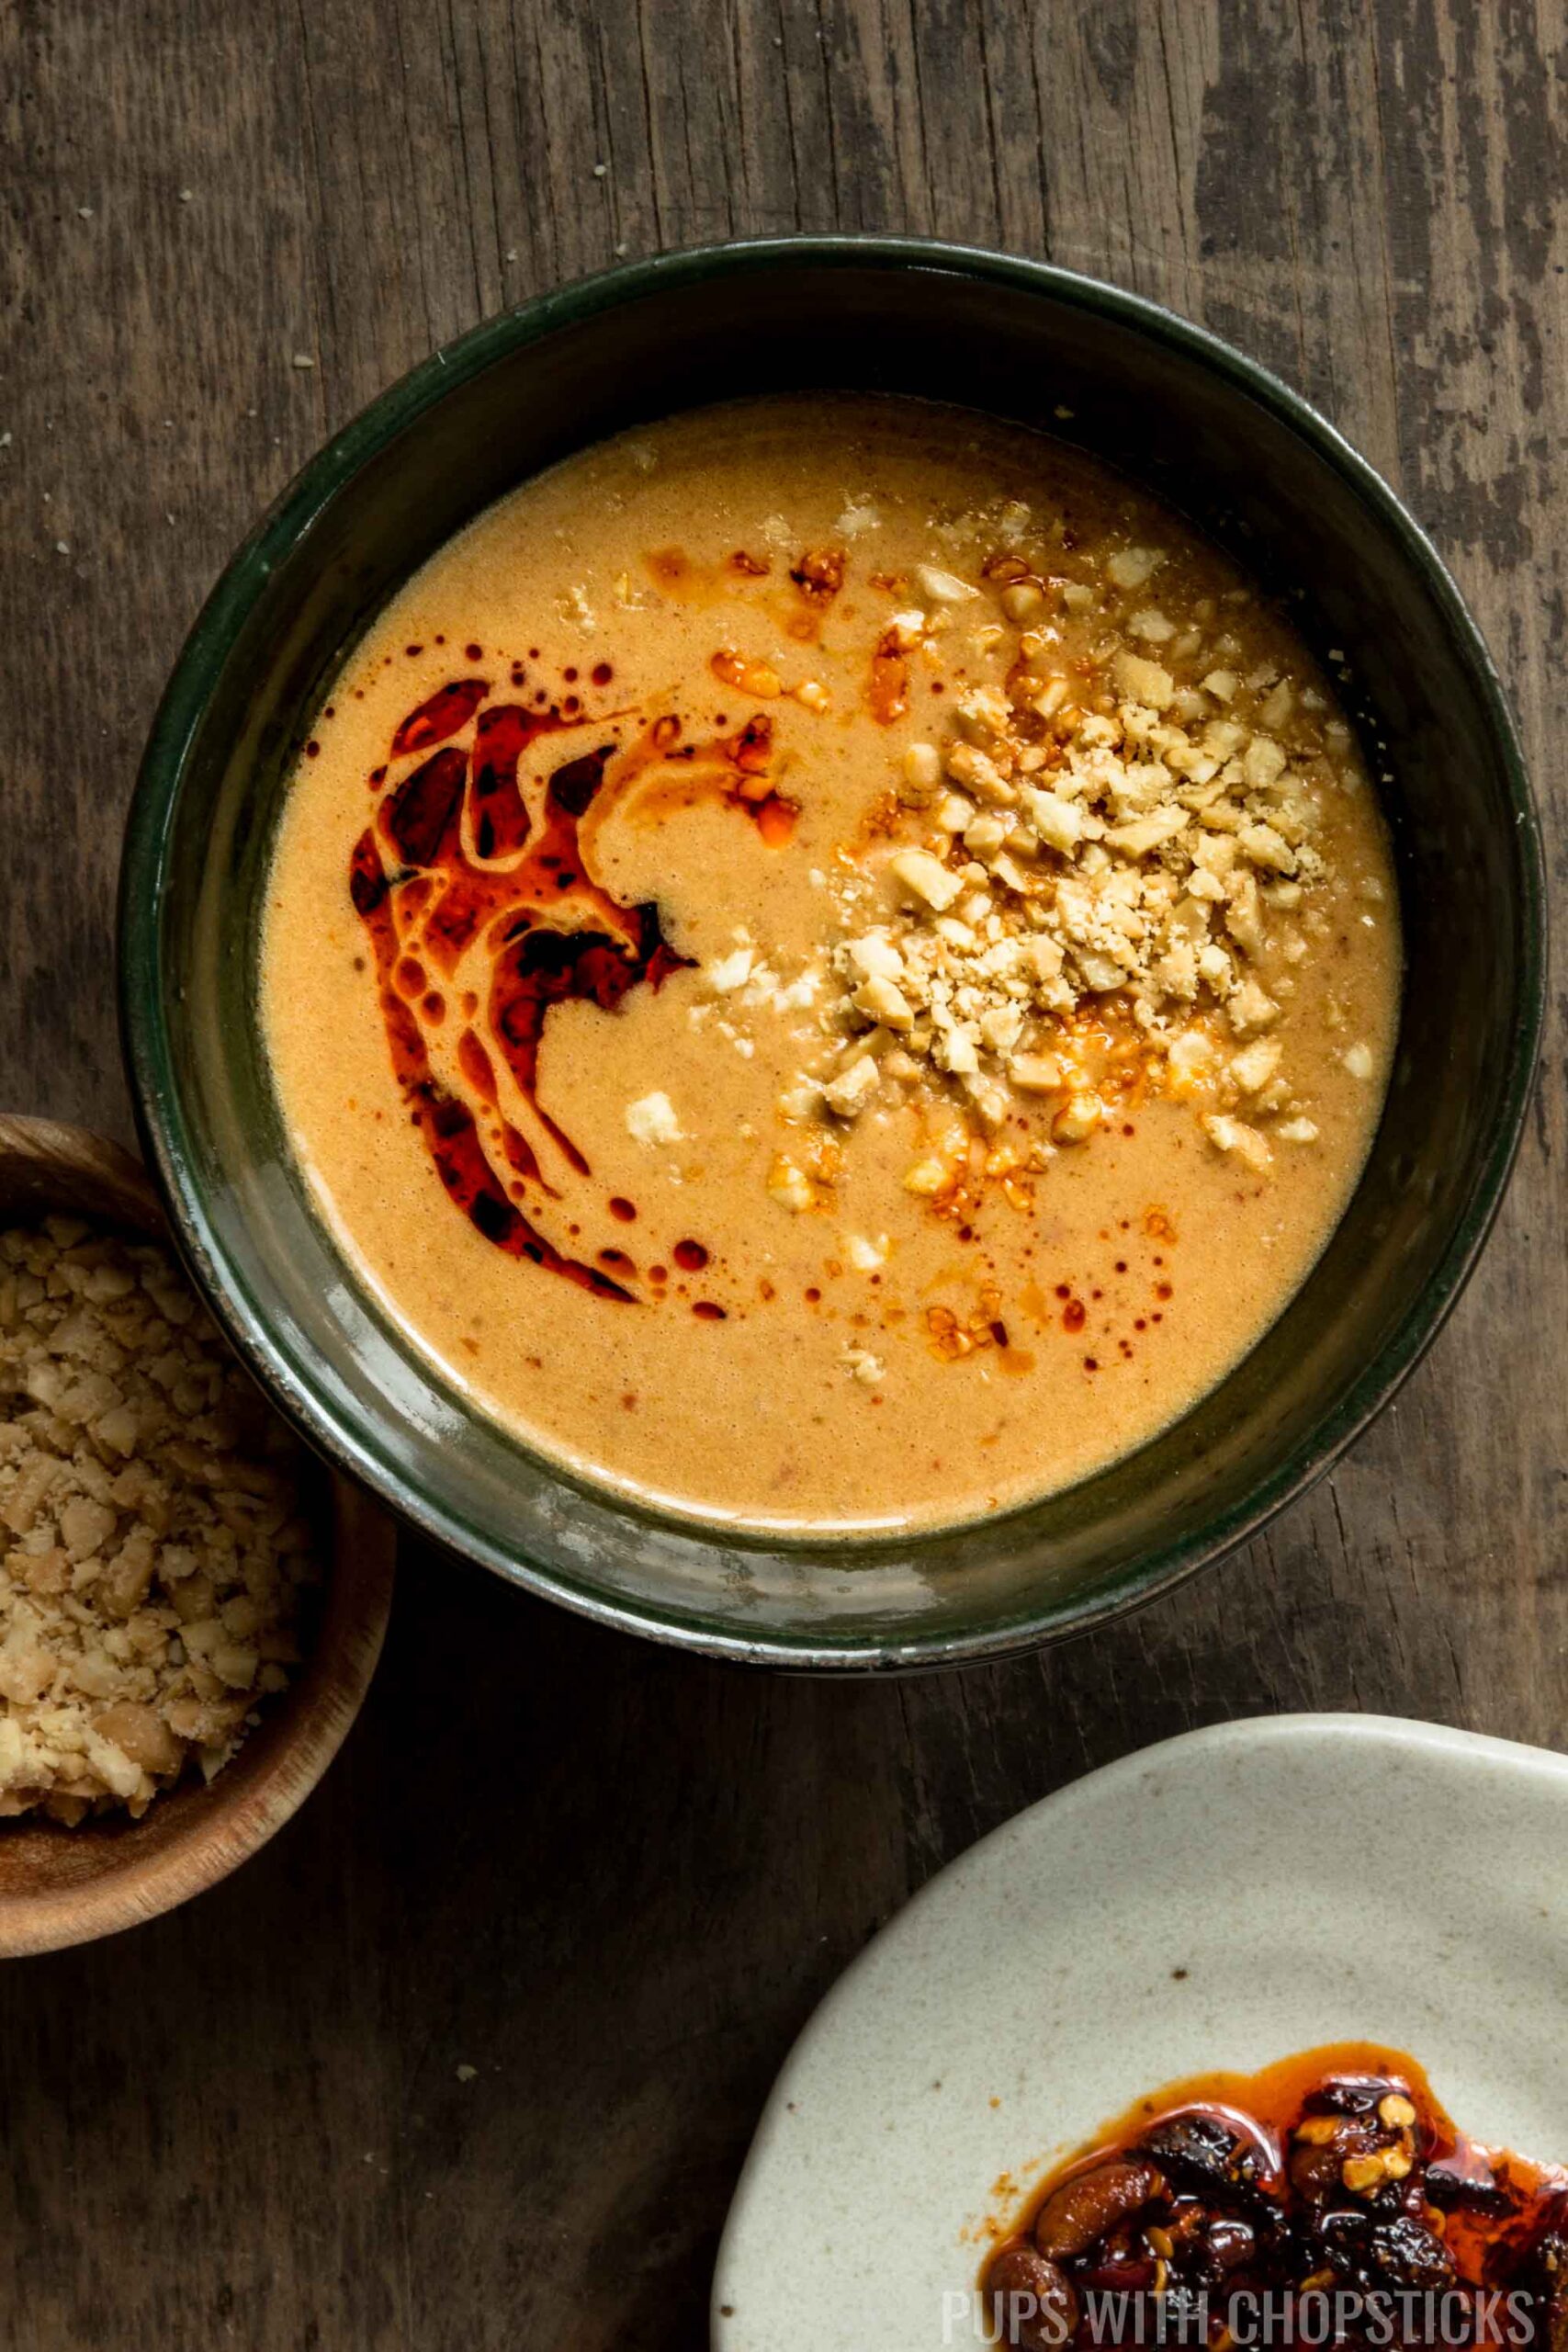 A bowl of Thai peanut sauce served with crushed peanuts on top and drizzled with chili oil